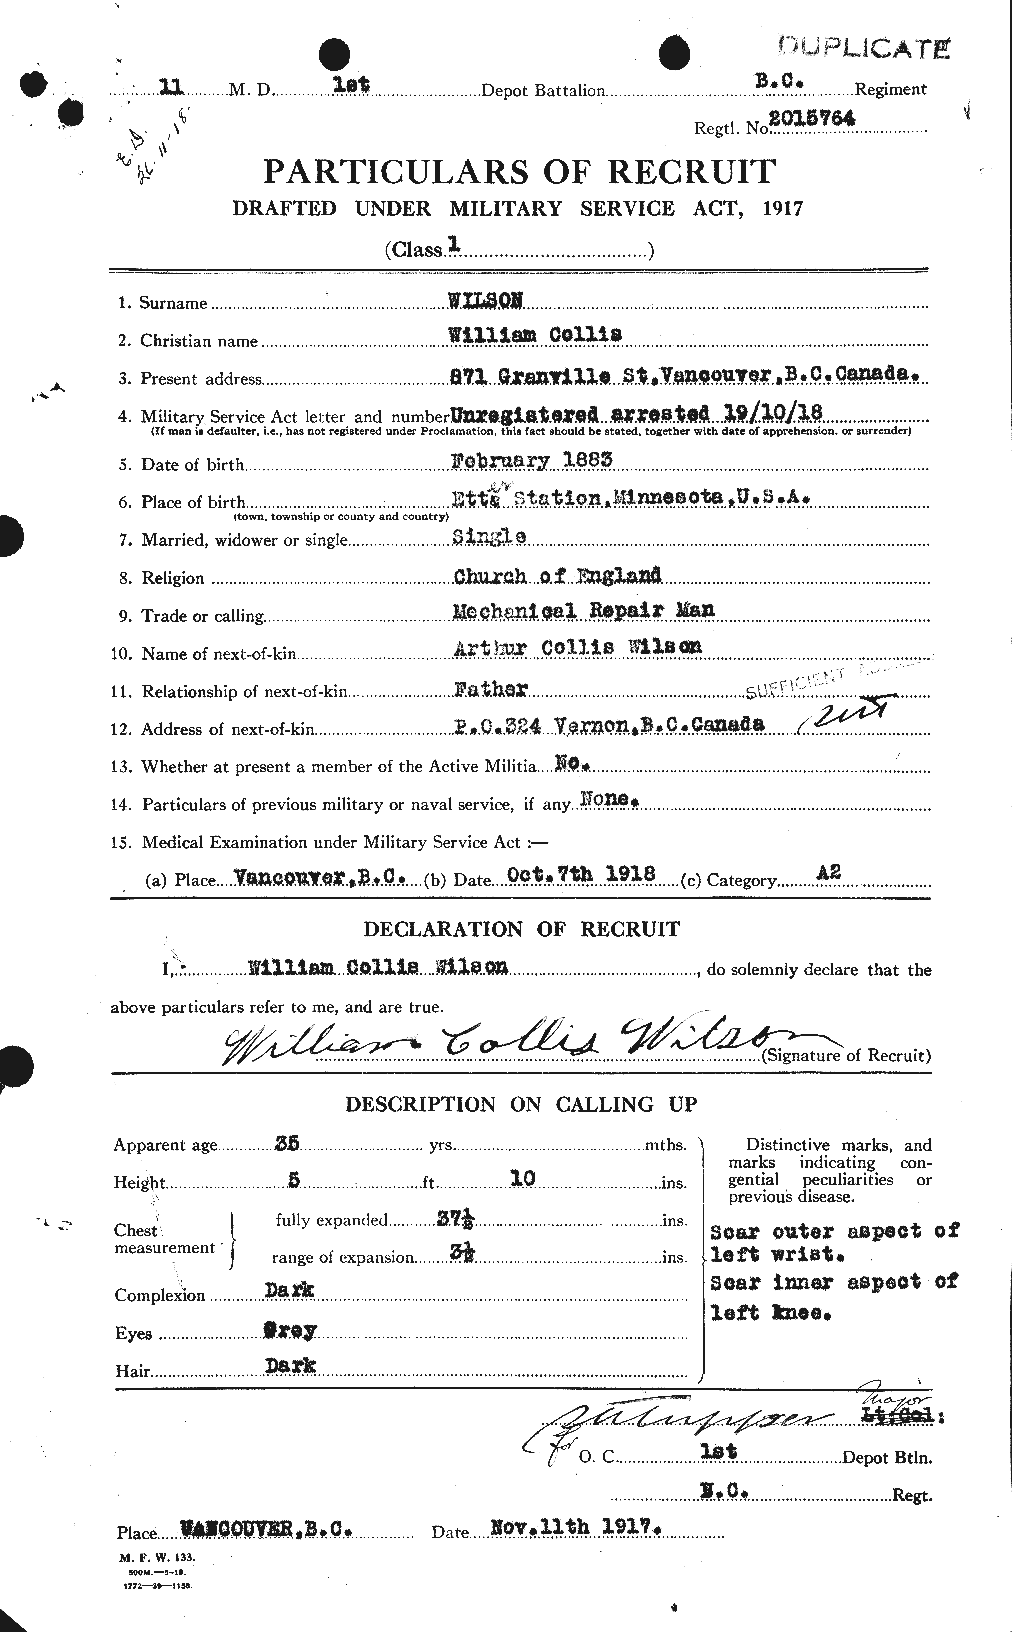 Personnel Records of the First World War - CEF 681958a